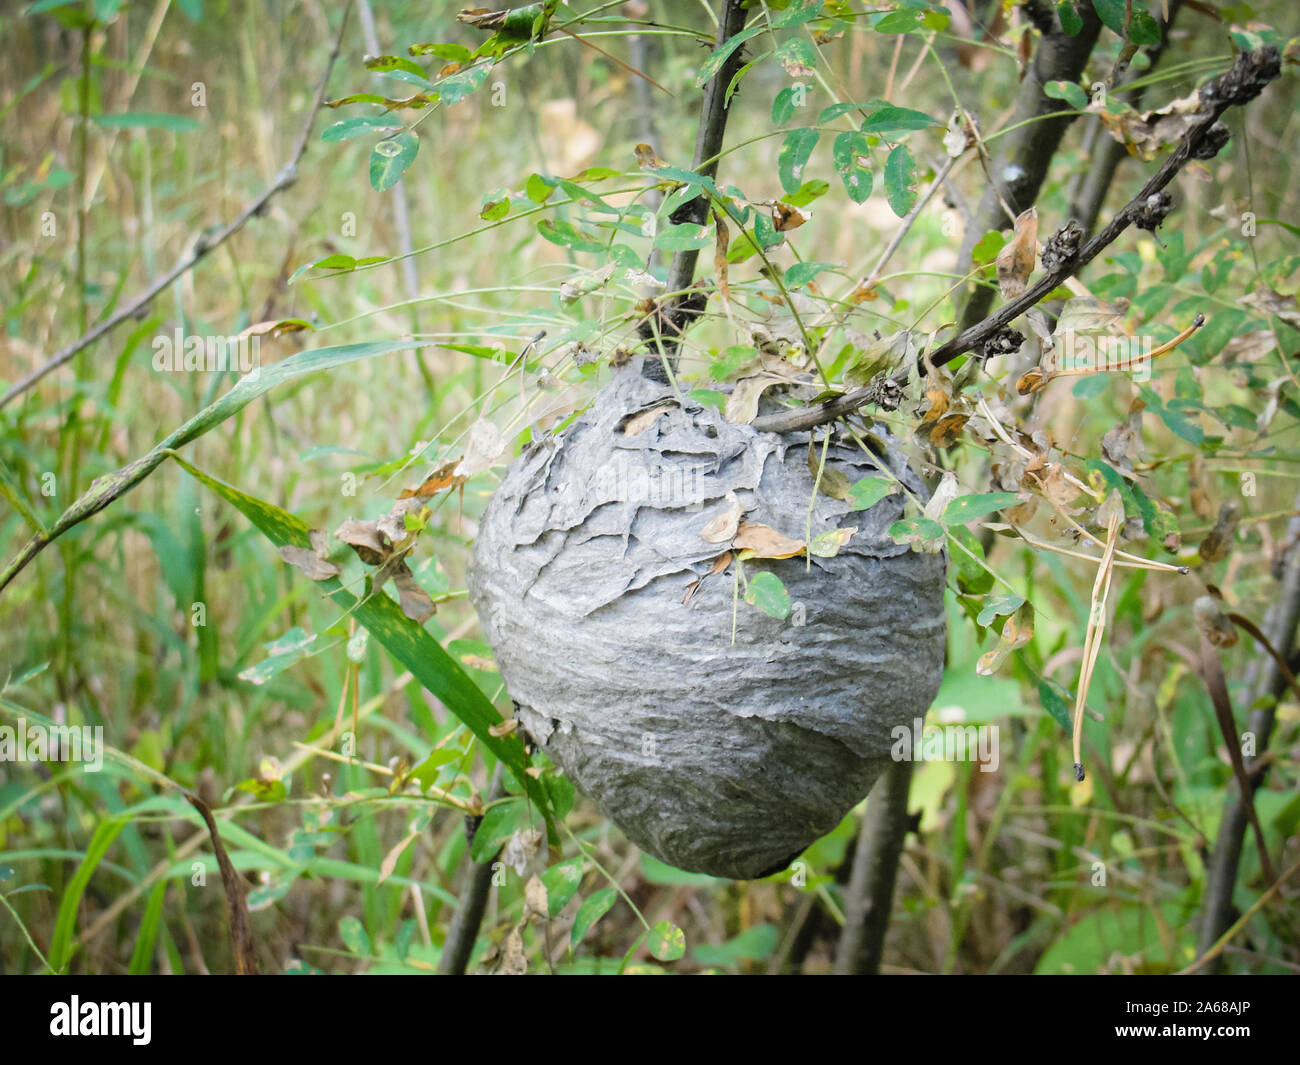 Vespiary or wasps nest at forest in summer Stock Photo